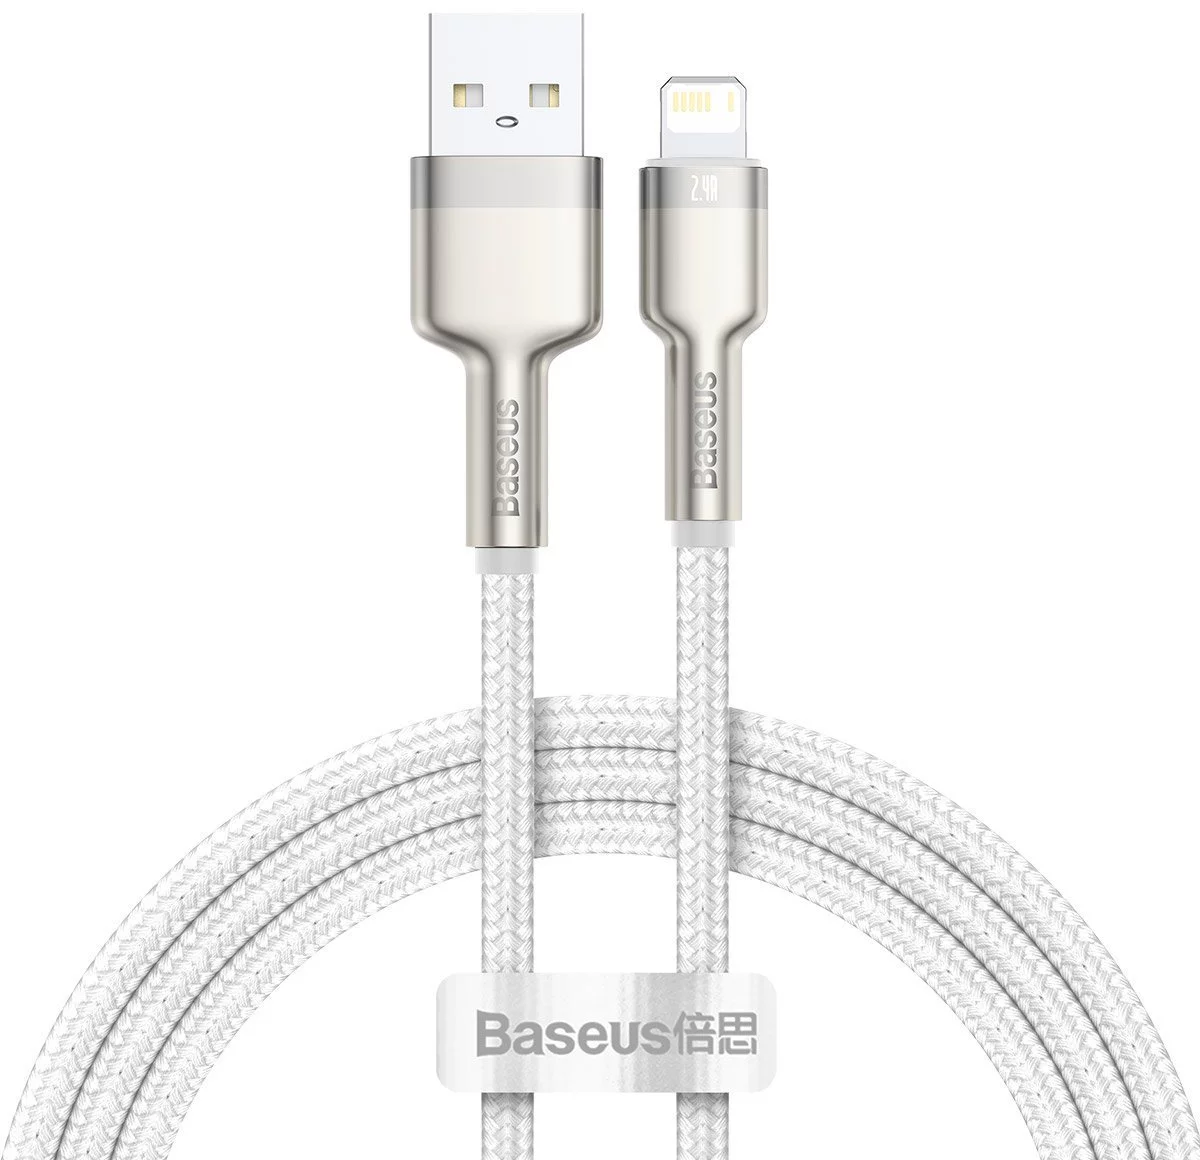 Kábel Baseus USB cable for Lightning Cafule, 2.4A, 1m (white) (6953156202252)